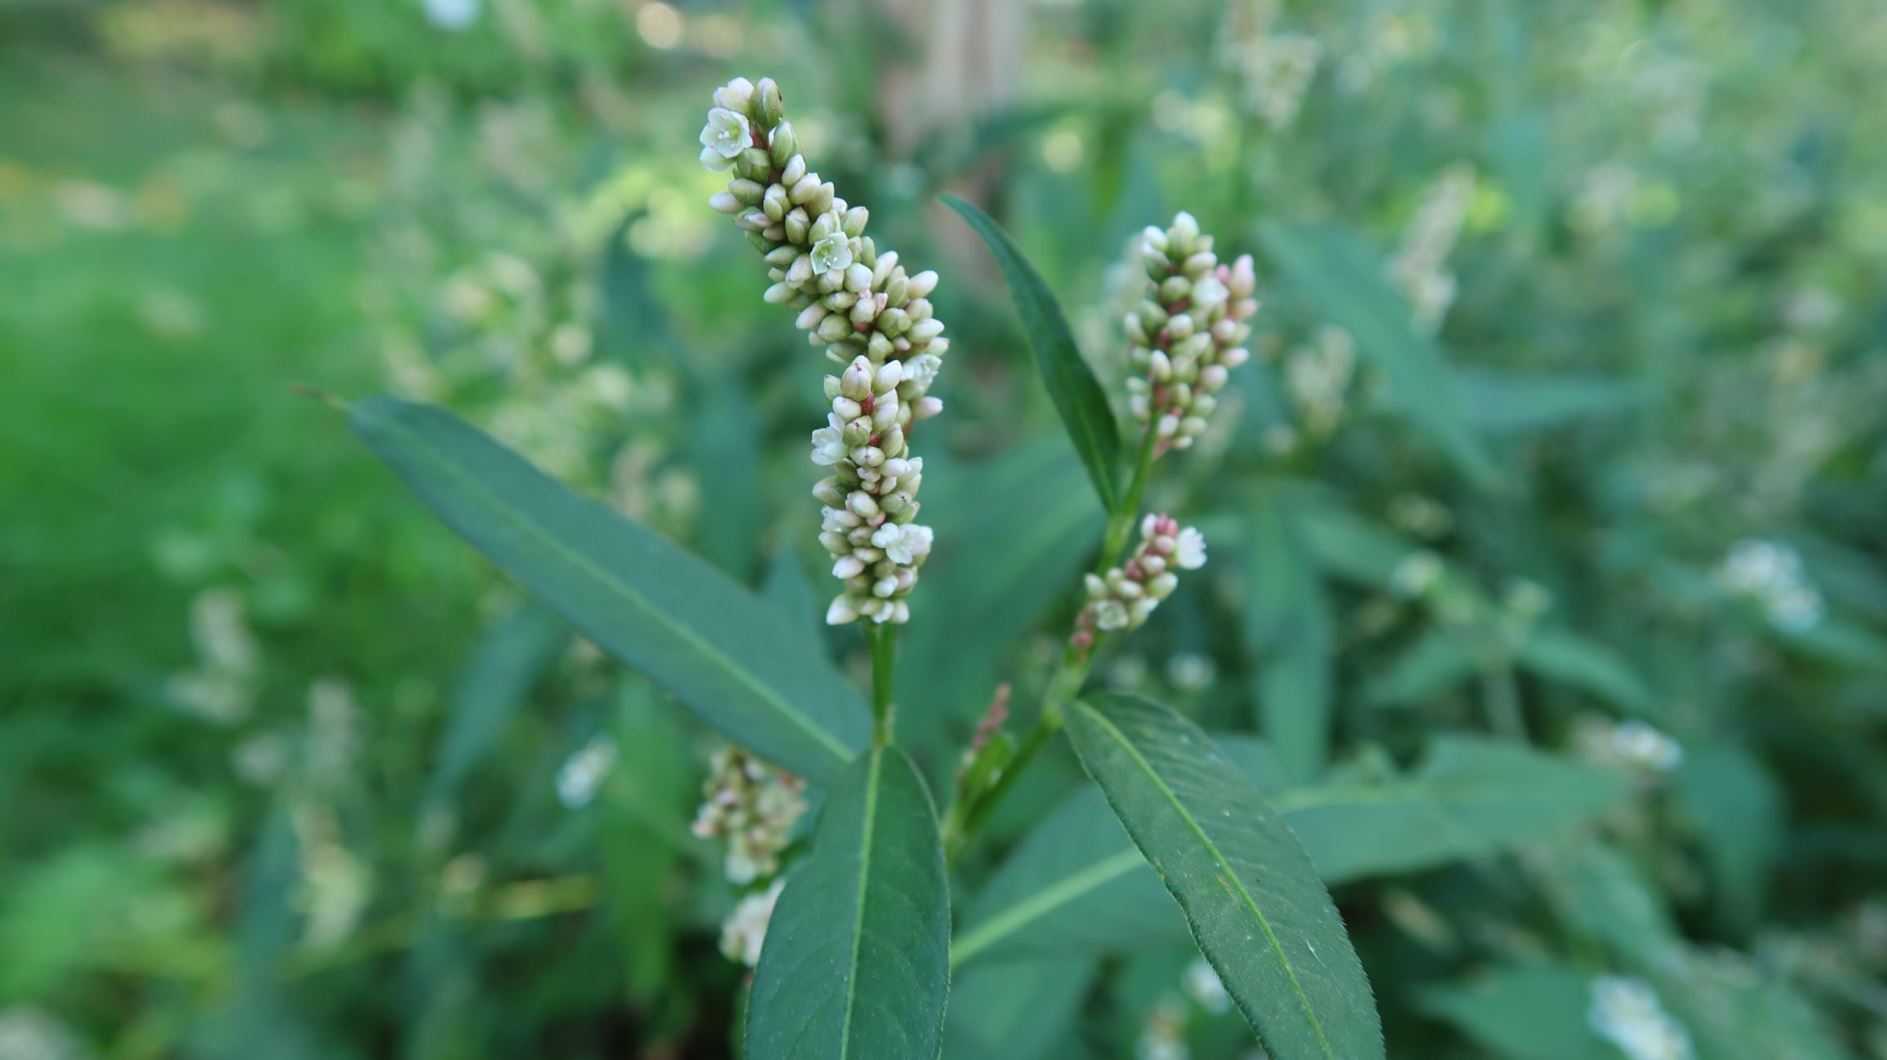 Persicaria maculosa - Floh-Knöterich, lady's thumb